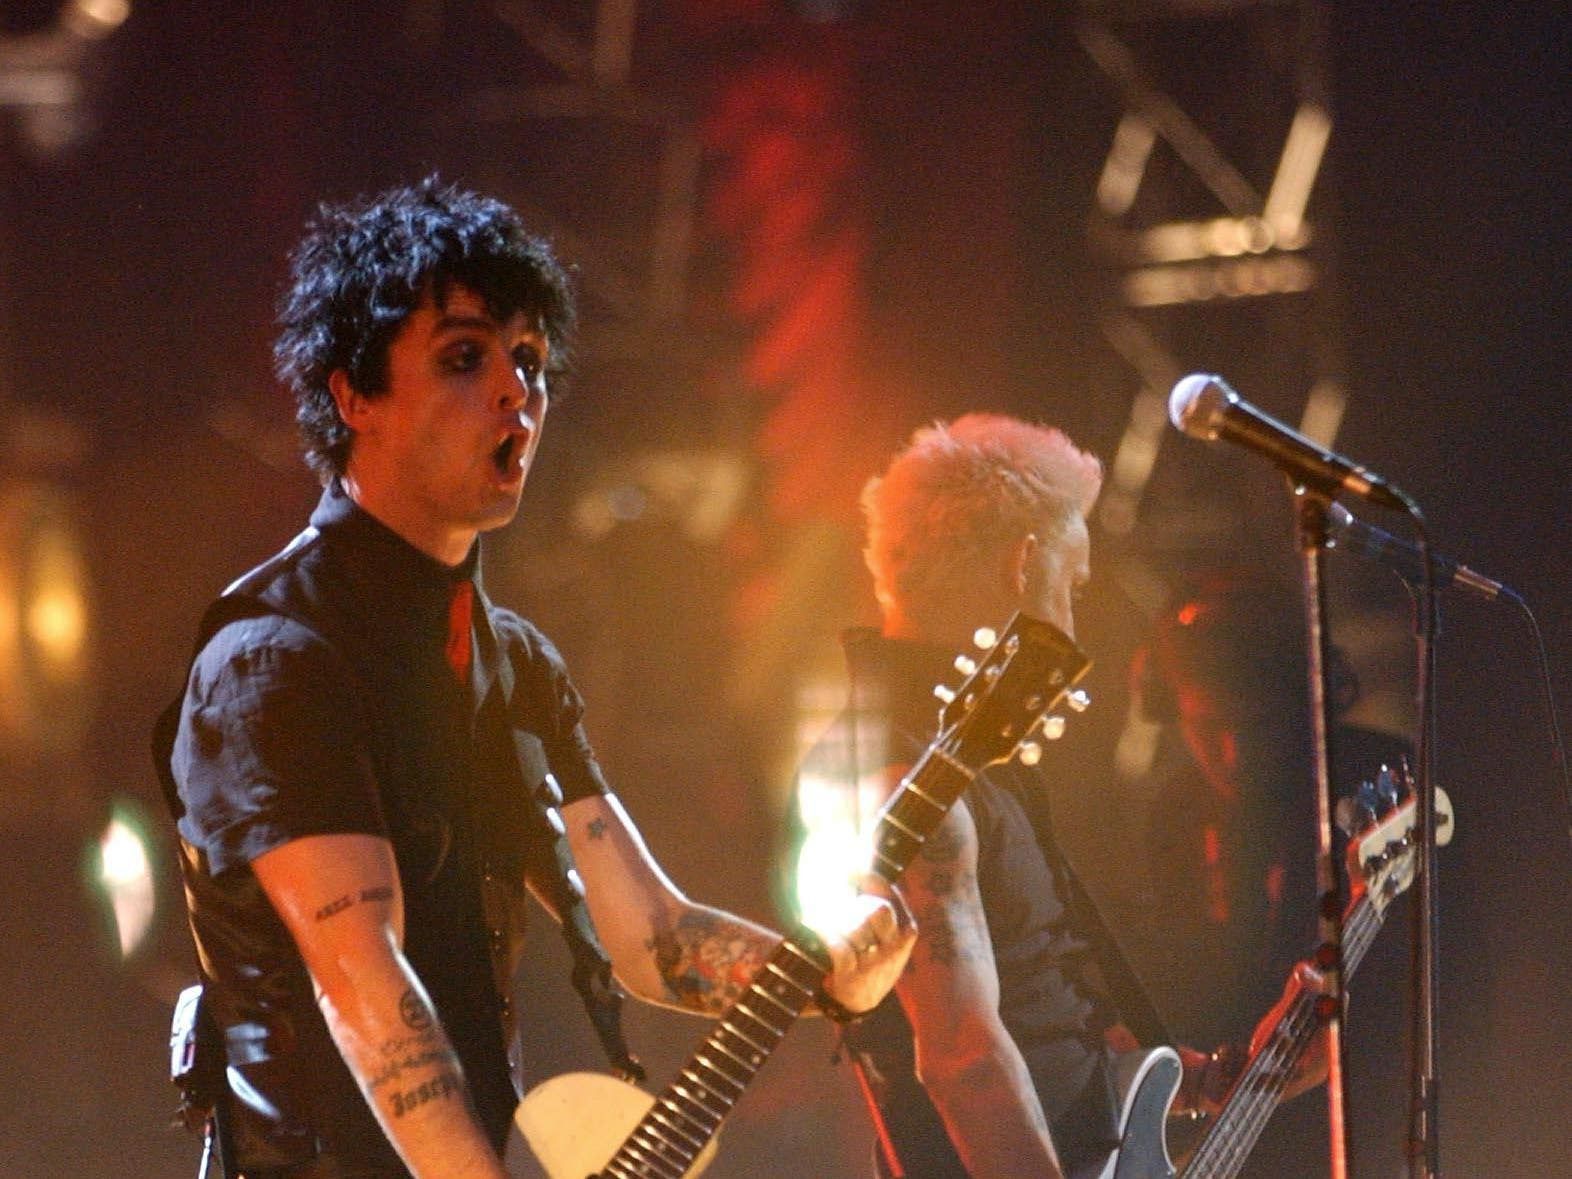 Green Day play to sold-out Wembley Stadium